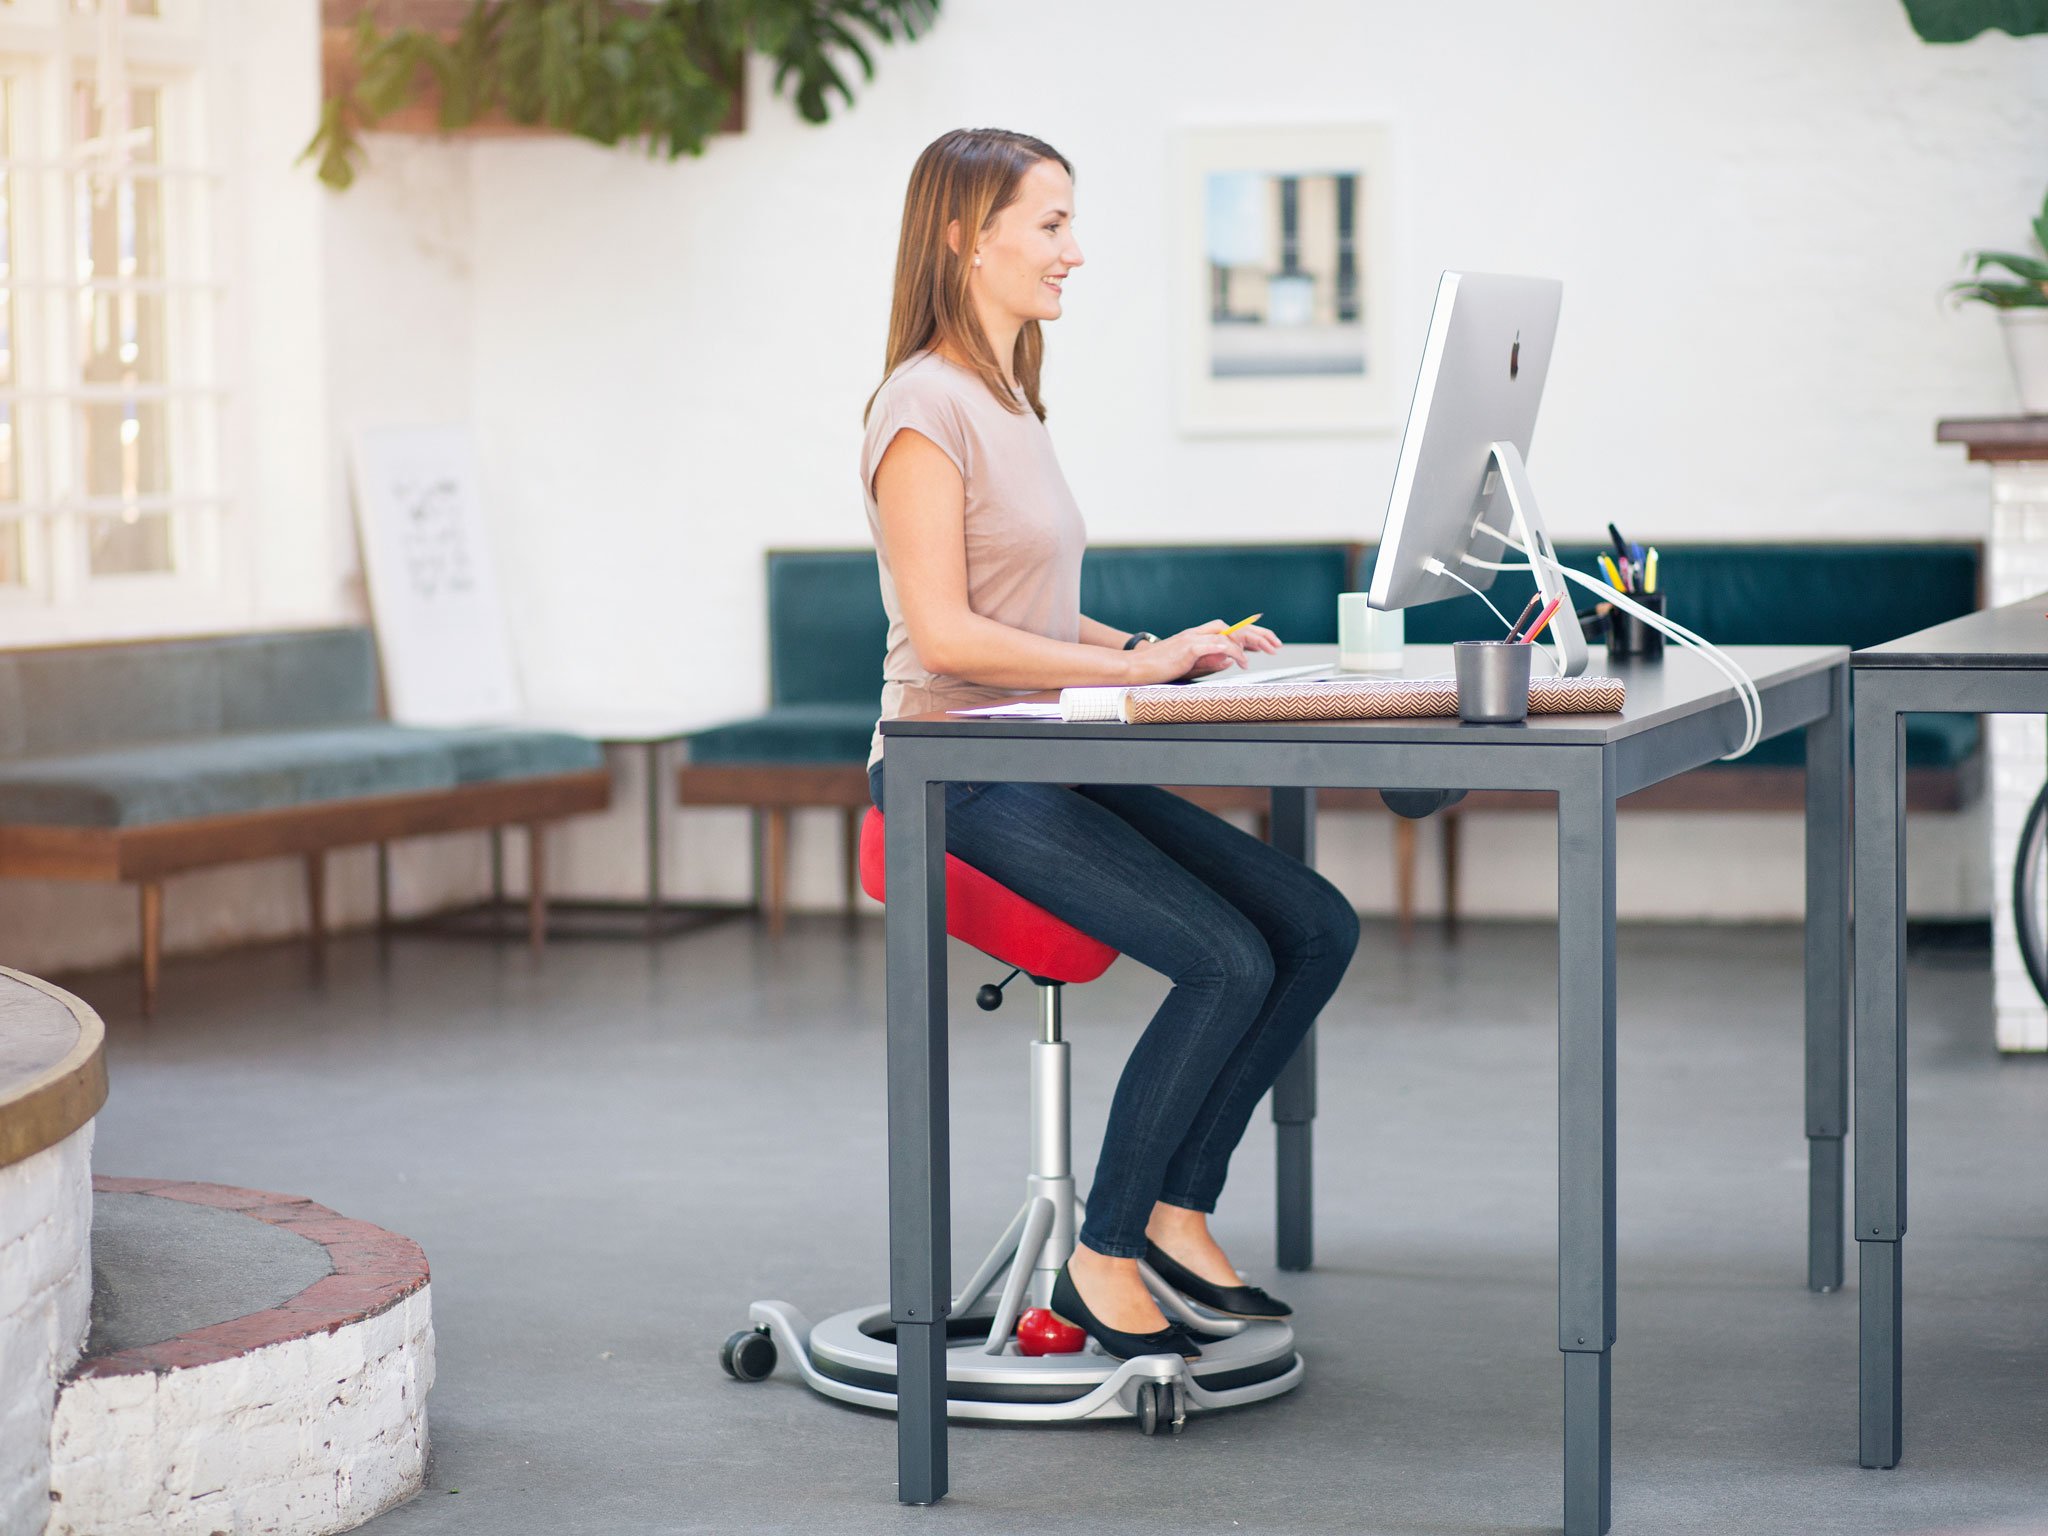 5 simple physiotherapy exercises to do at your office desk